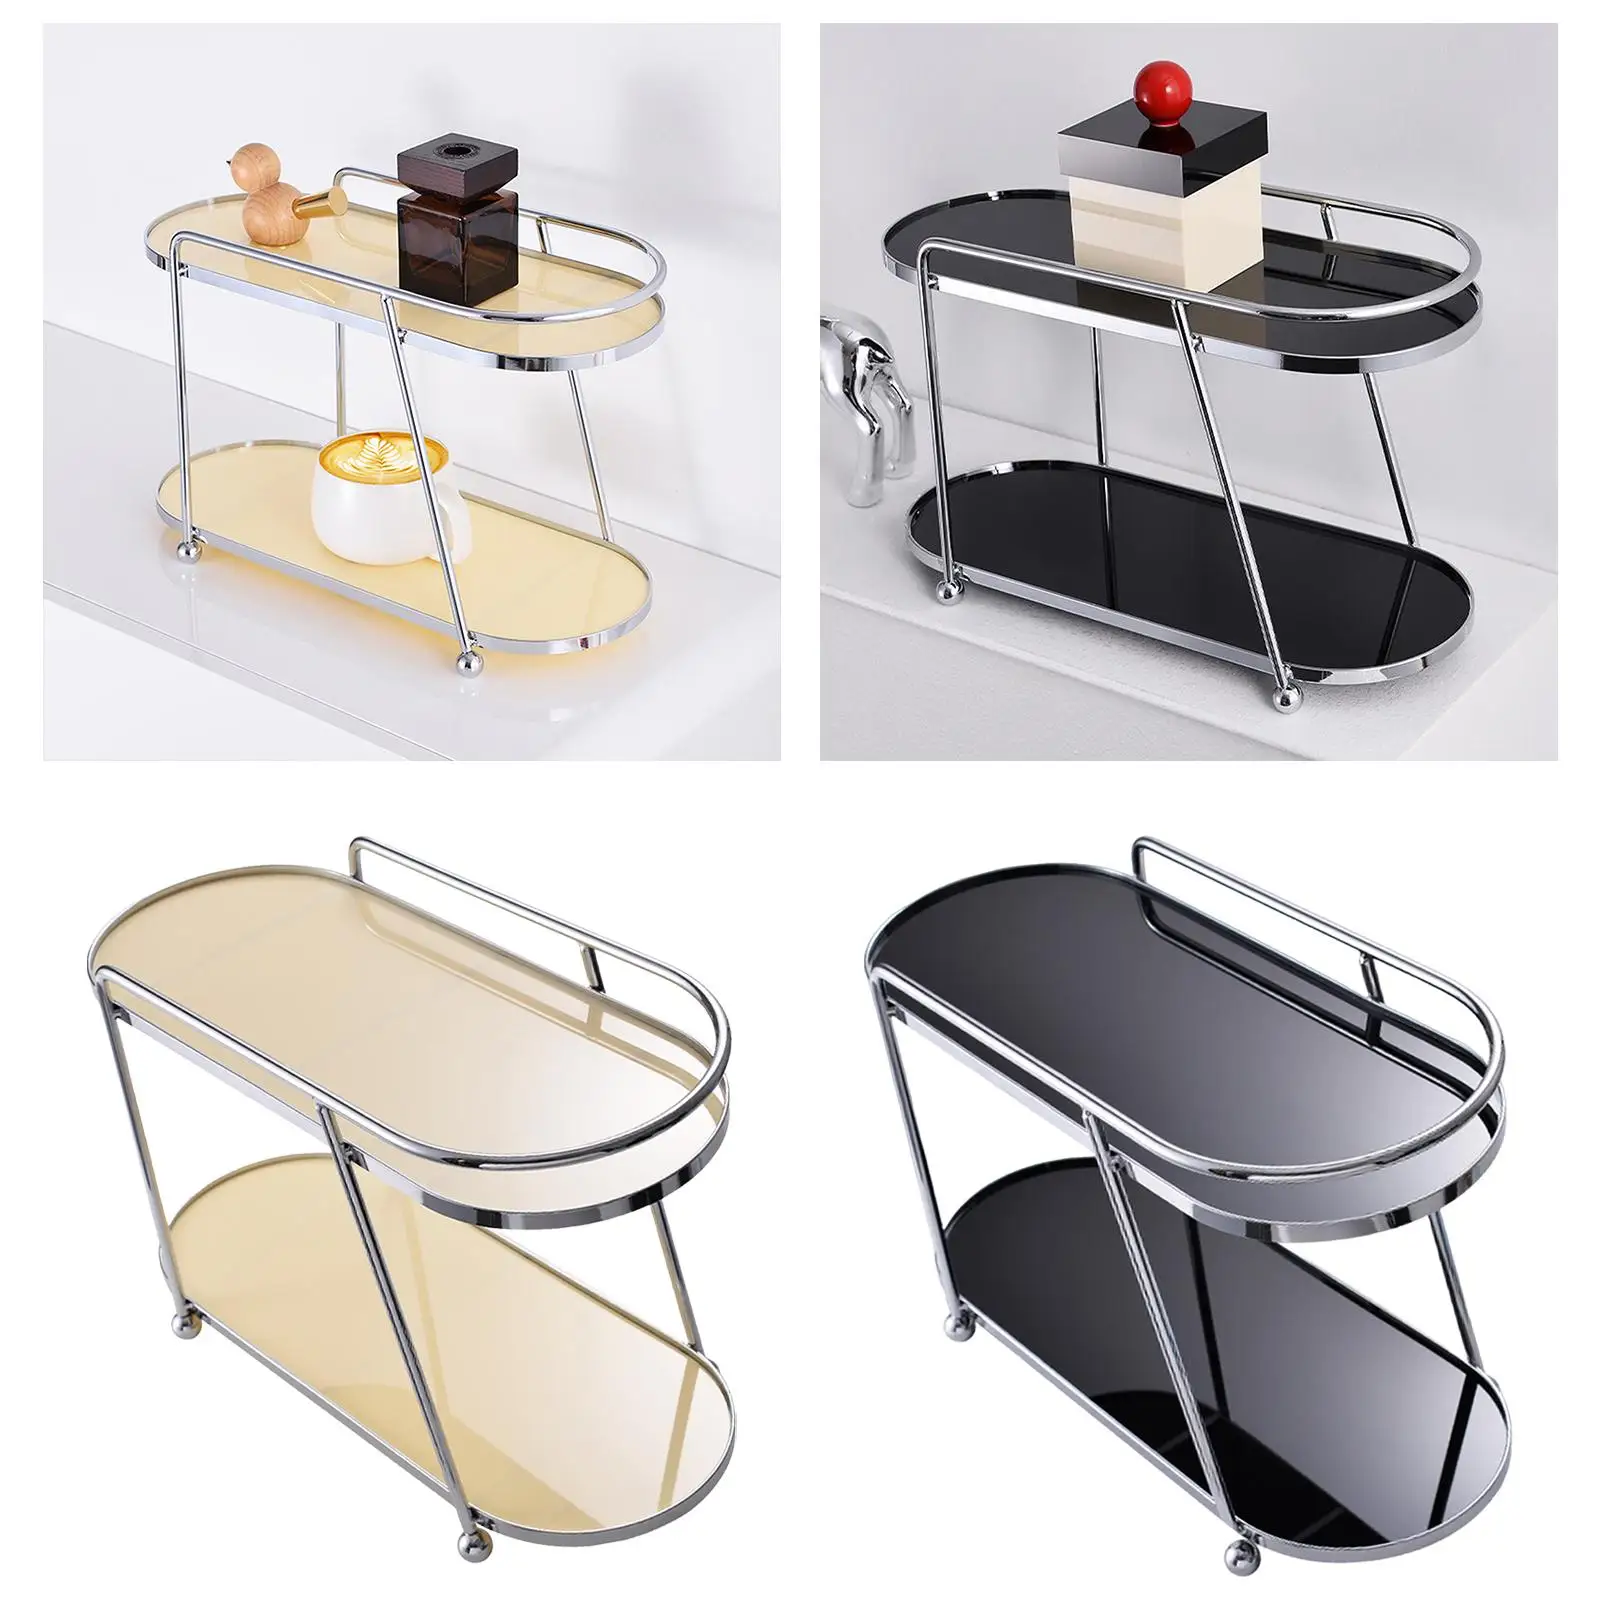 Cosmetics Organizer Rack 2 Layer Multiuse Home Storage and Display Coffee Table Stand Wire Vanity Organizer Rack for Kitchen